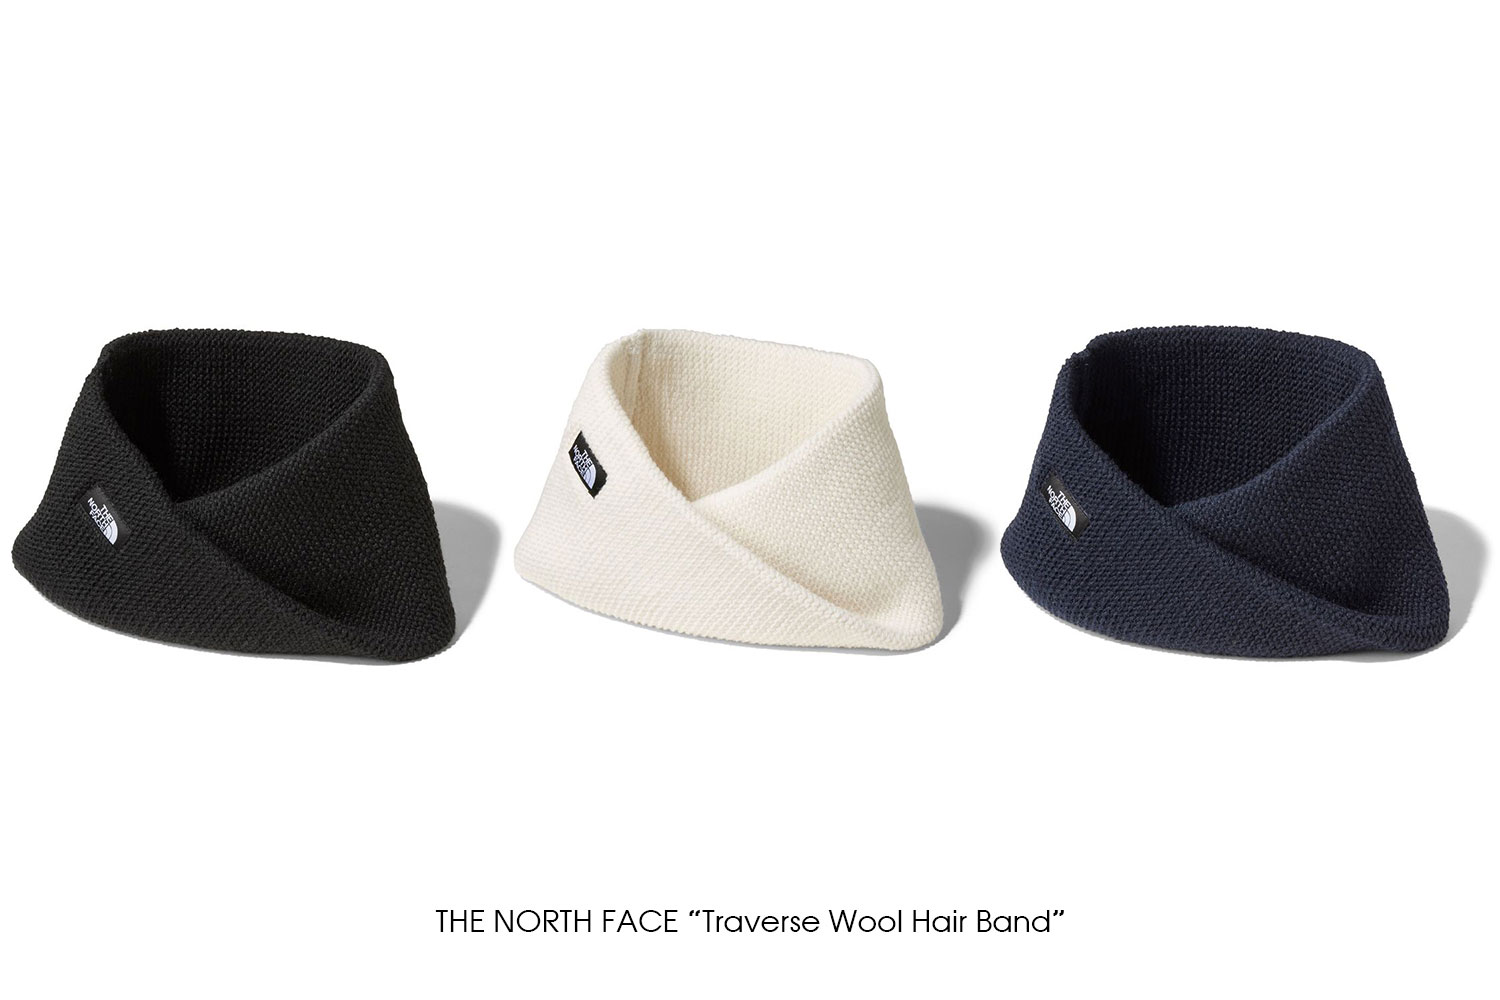 THE NORTH FACE "Traverse Wool Hair Band"